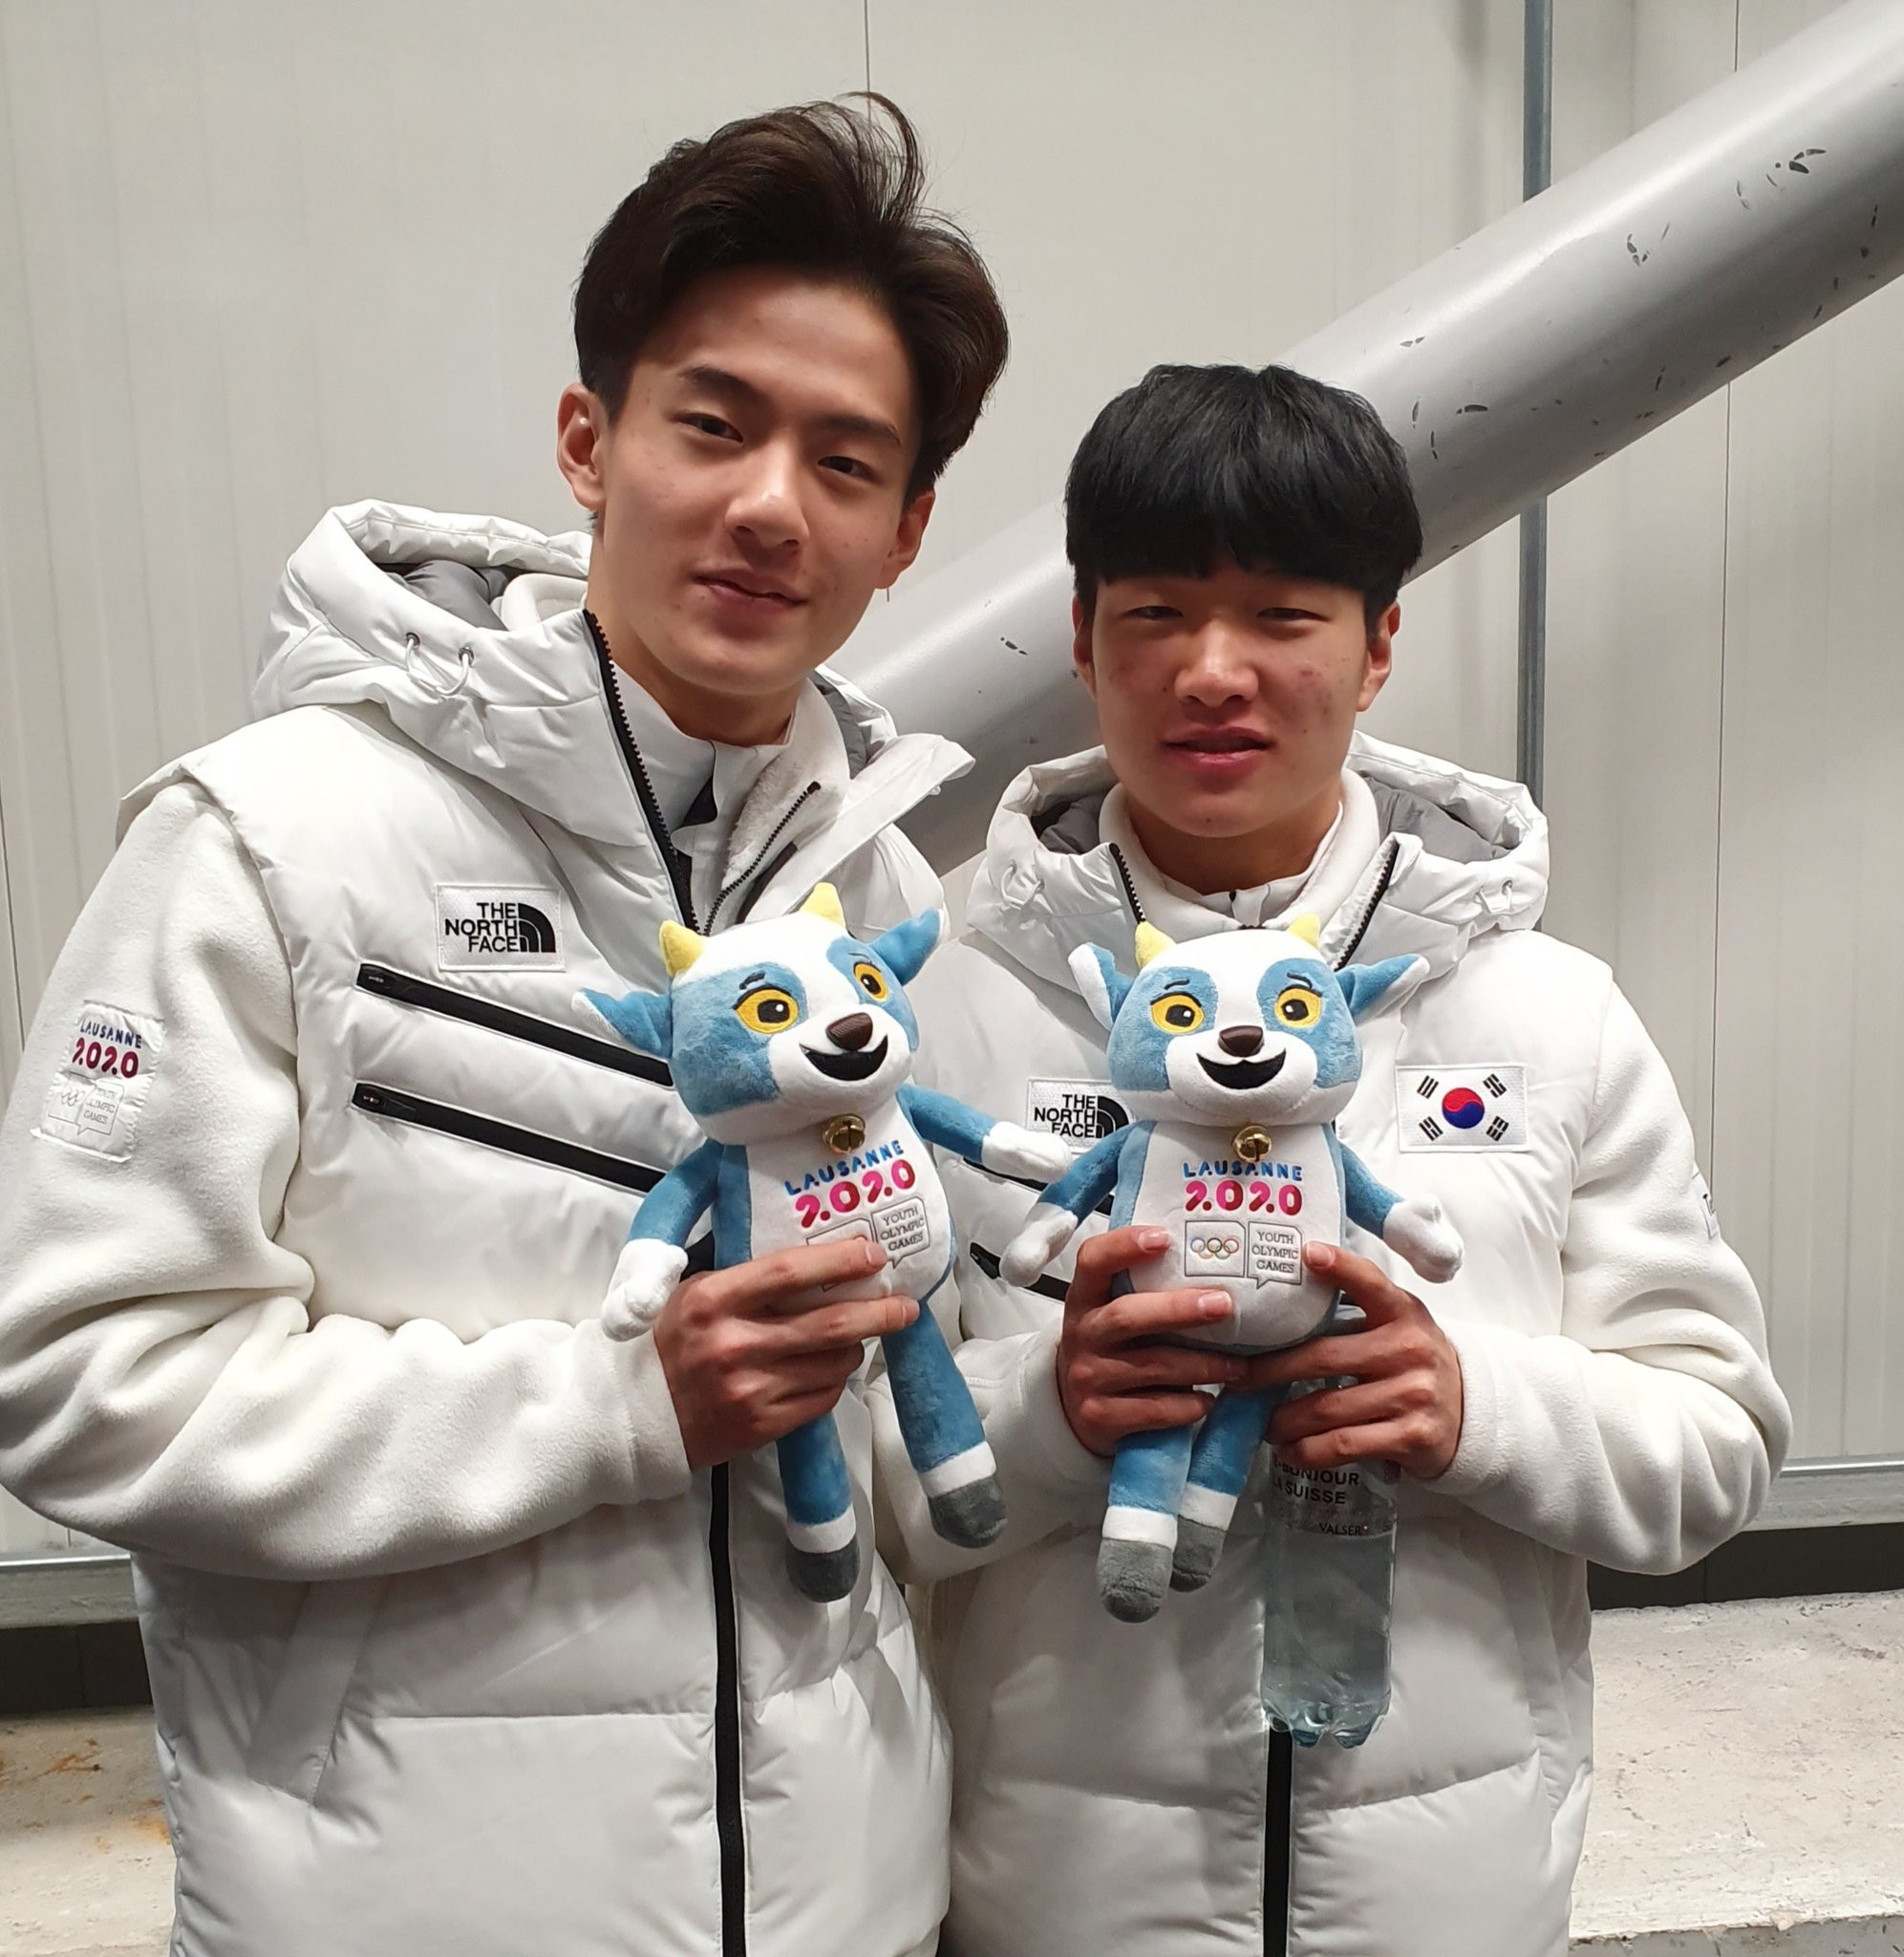 Lee Jeong-min, right, at the Winter Youth Olympics, would take 500m gold in Bormio in Italy ©Twitter/@youtholympics